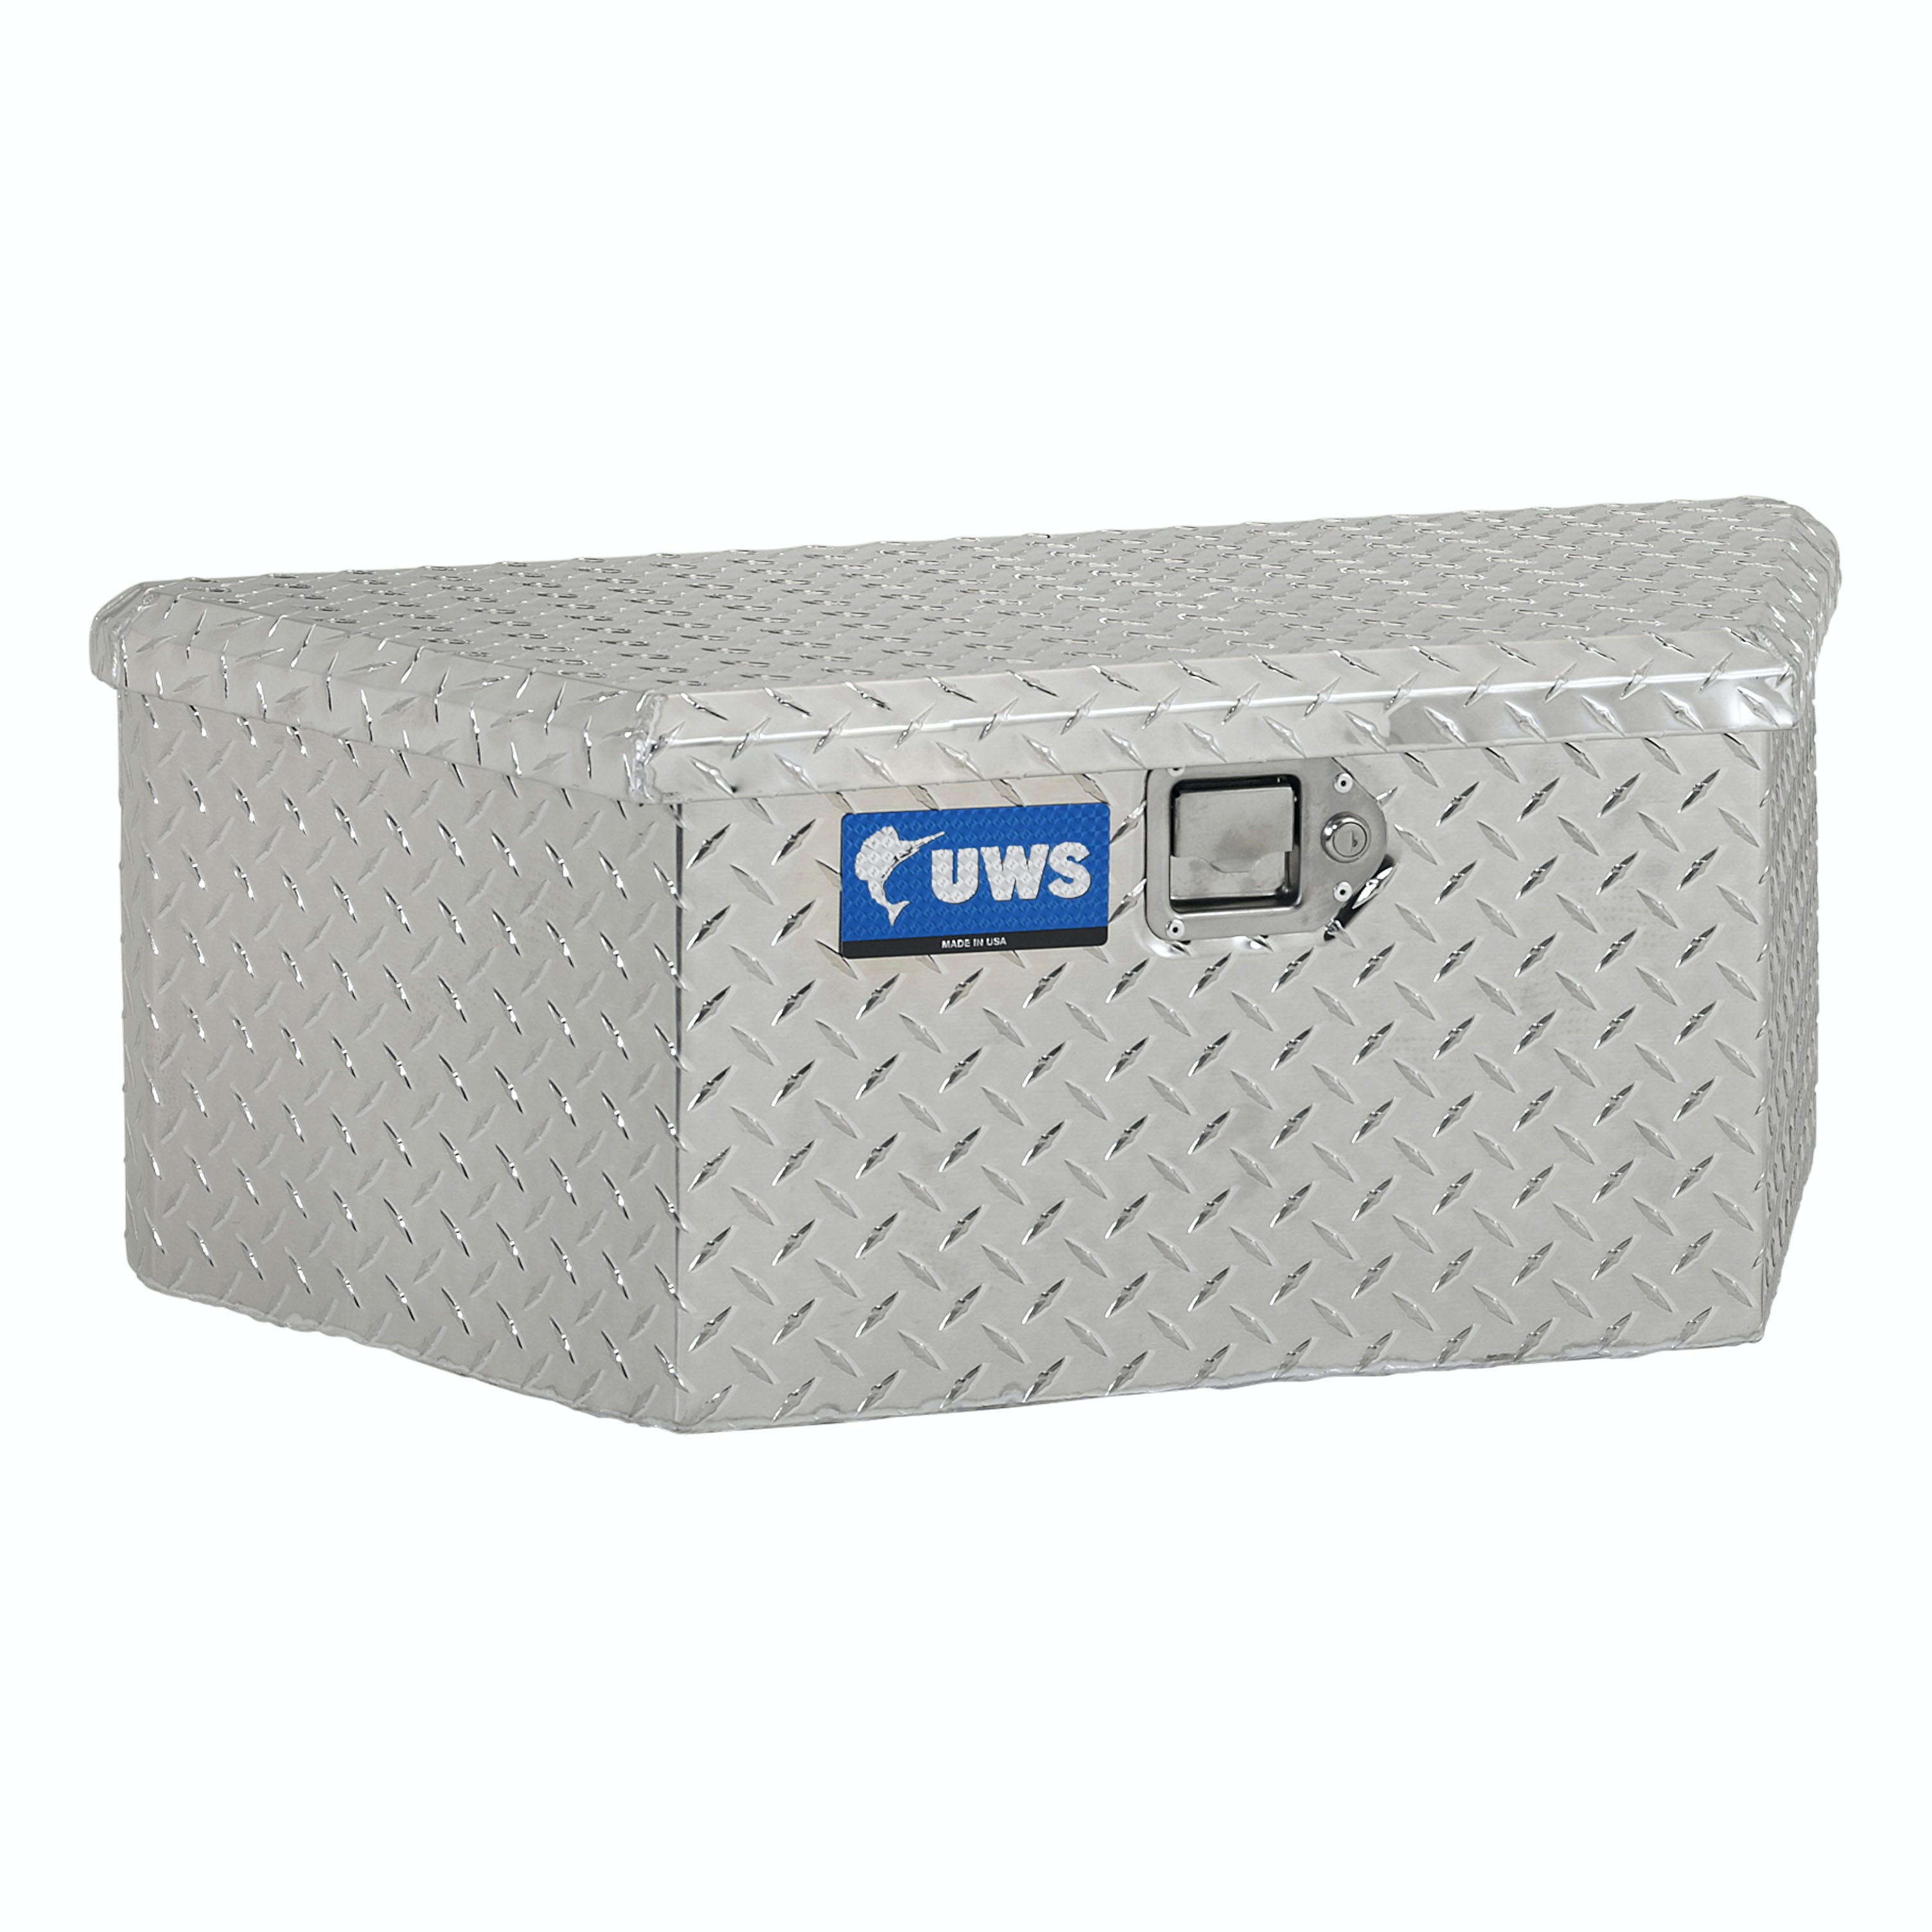 UWS EC20411 34 in. Trailer Tongue Box with Low Profile